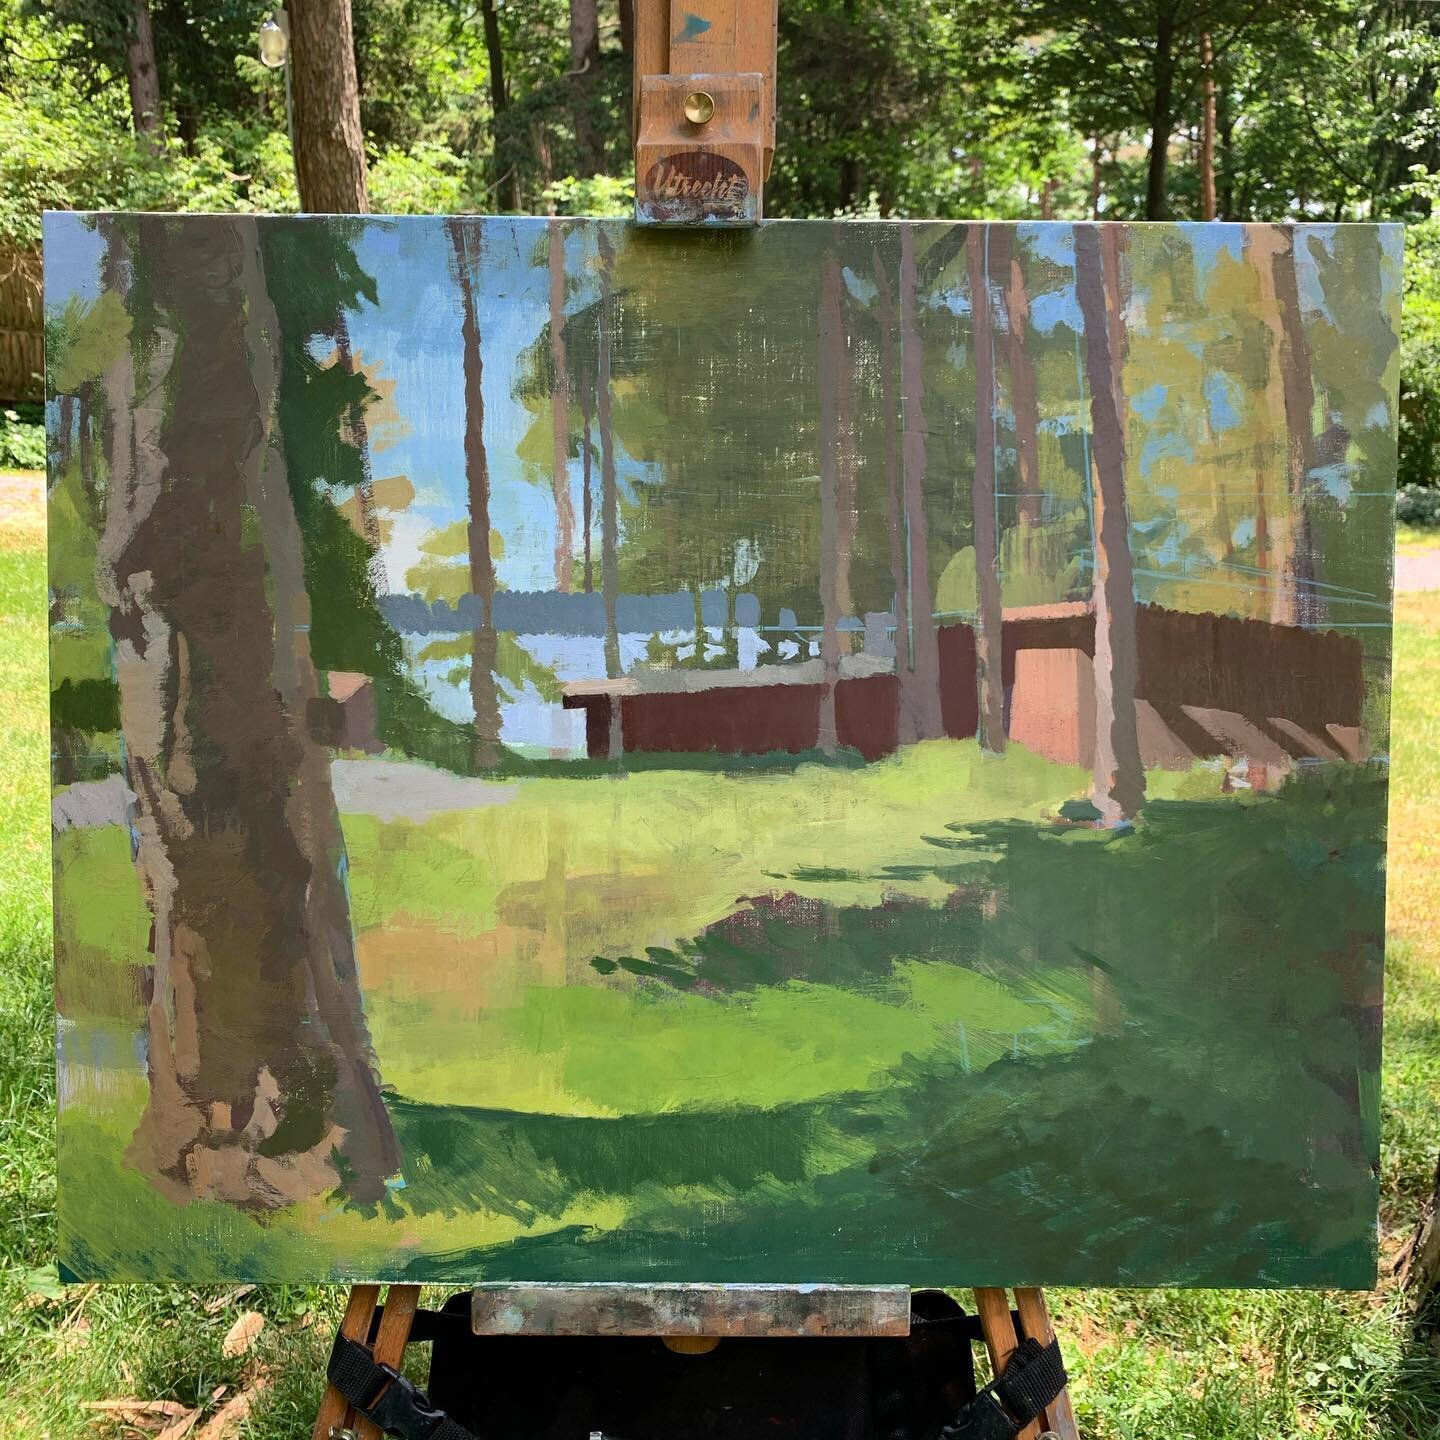 Same painting - third composition change. I think this is the one though....🤞 #pleinairpainting 
#pleinair
#oilpainting 
#perceptualpainting 
#landscape 
#beautifulday 
#space
#color 
#somuchgreen 
#morning 
#aaronmichaelthompson 
#paintlanguage